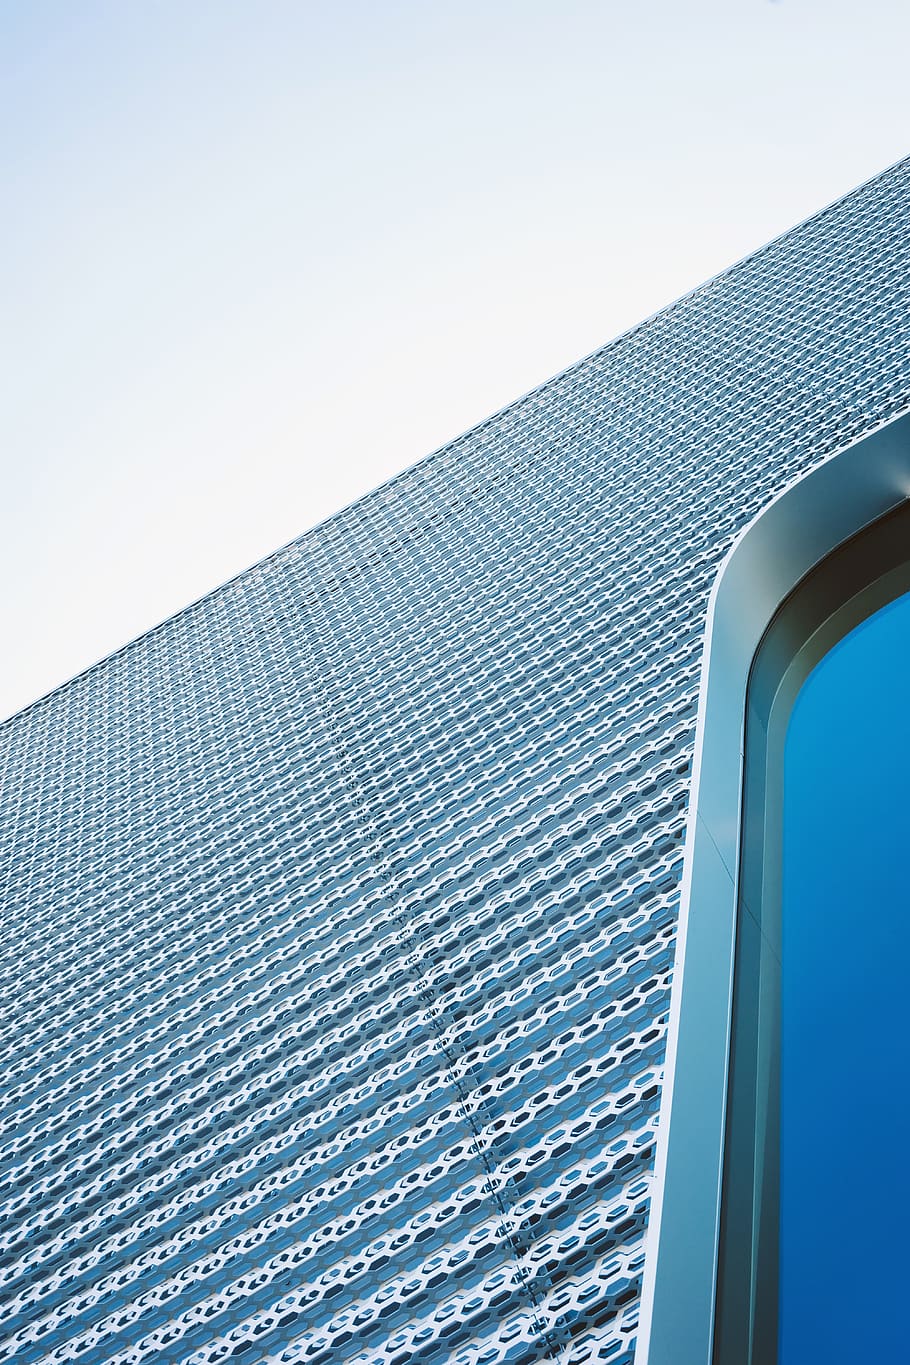 architecture, abstract, pattern, texture, exterior, window, reflection, cladding, metal, sky